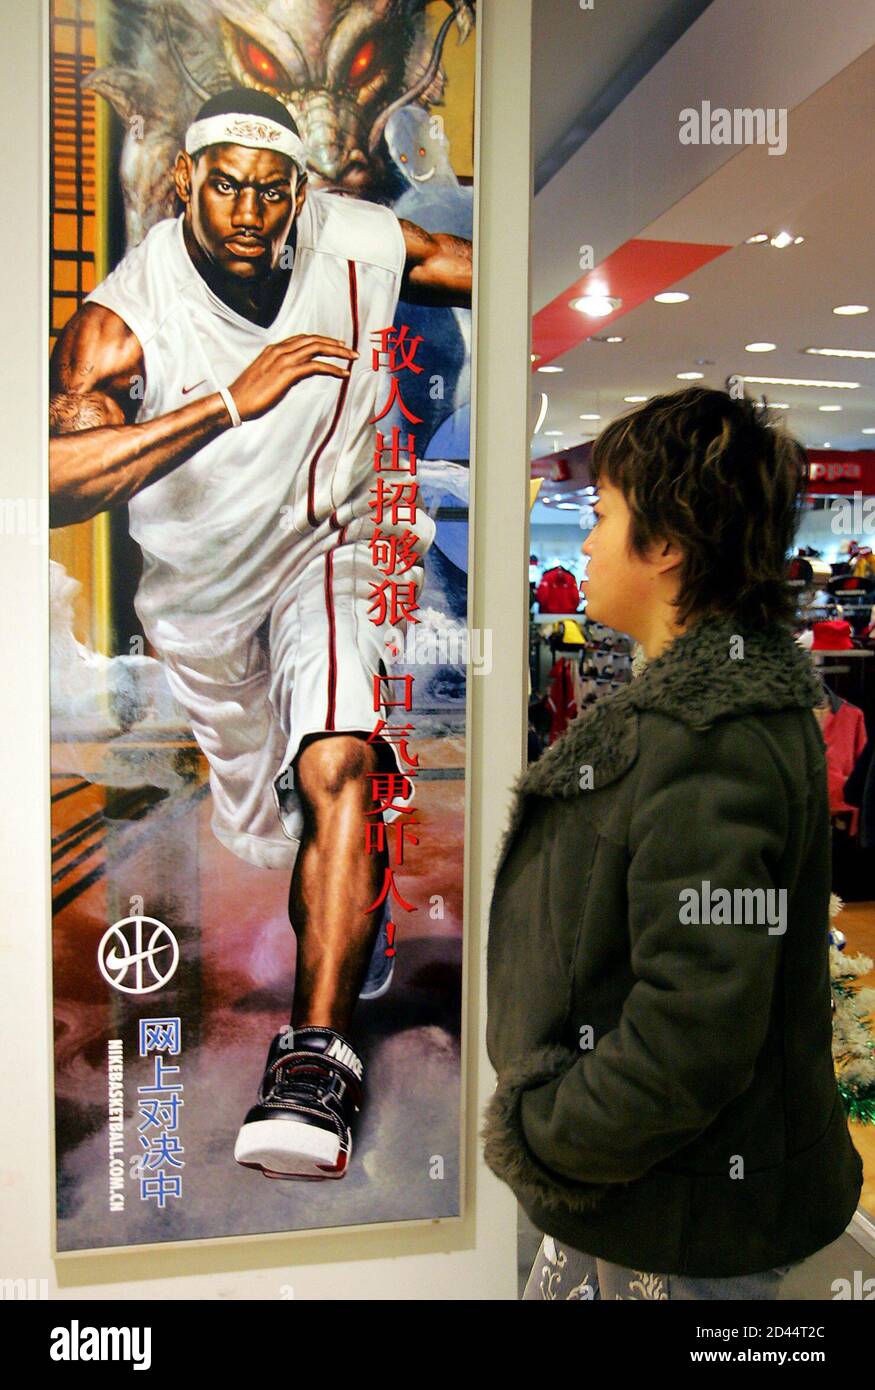 A Chinese shopper walks past NBA star LeBron James' advertisement in  Beijing December 7, 2004. China has kicked up a stink over a Nike footwear  advertisement in which U.S. basketball star LeBron